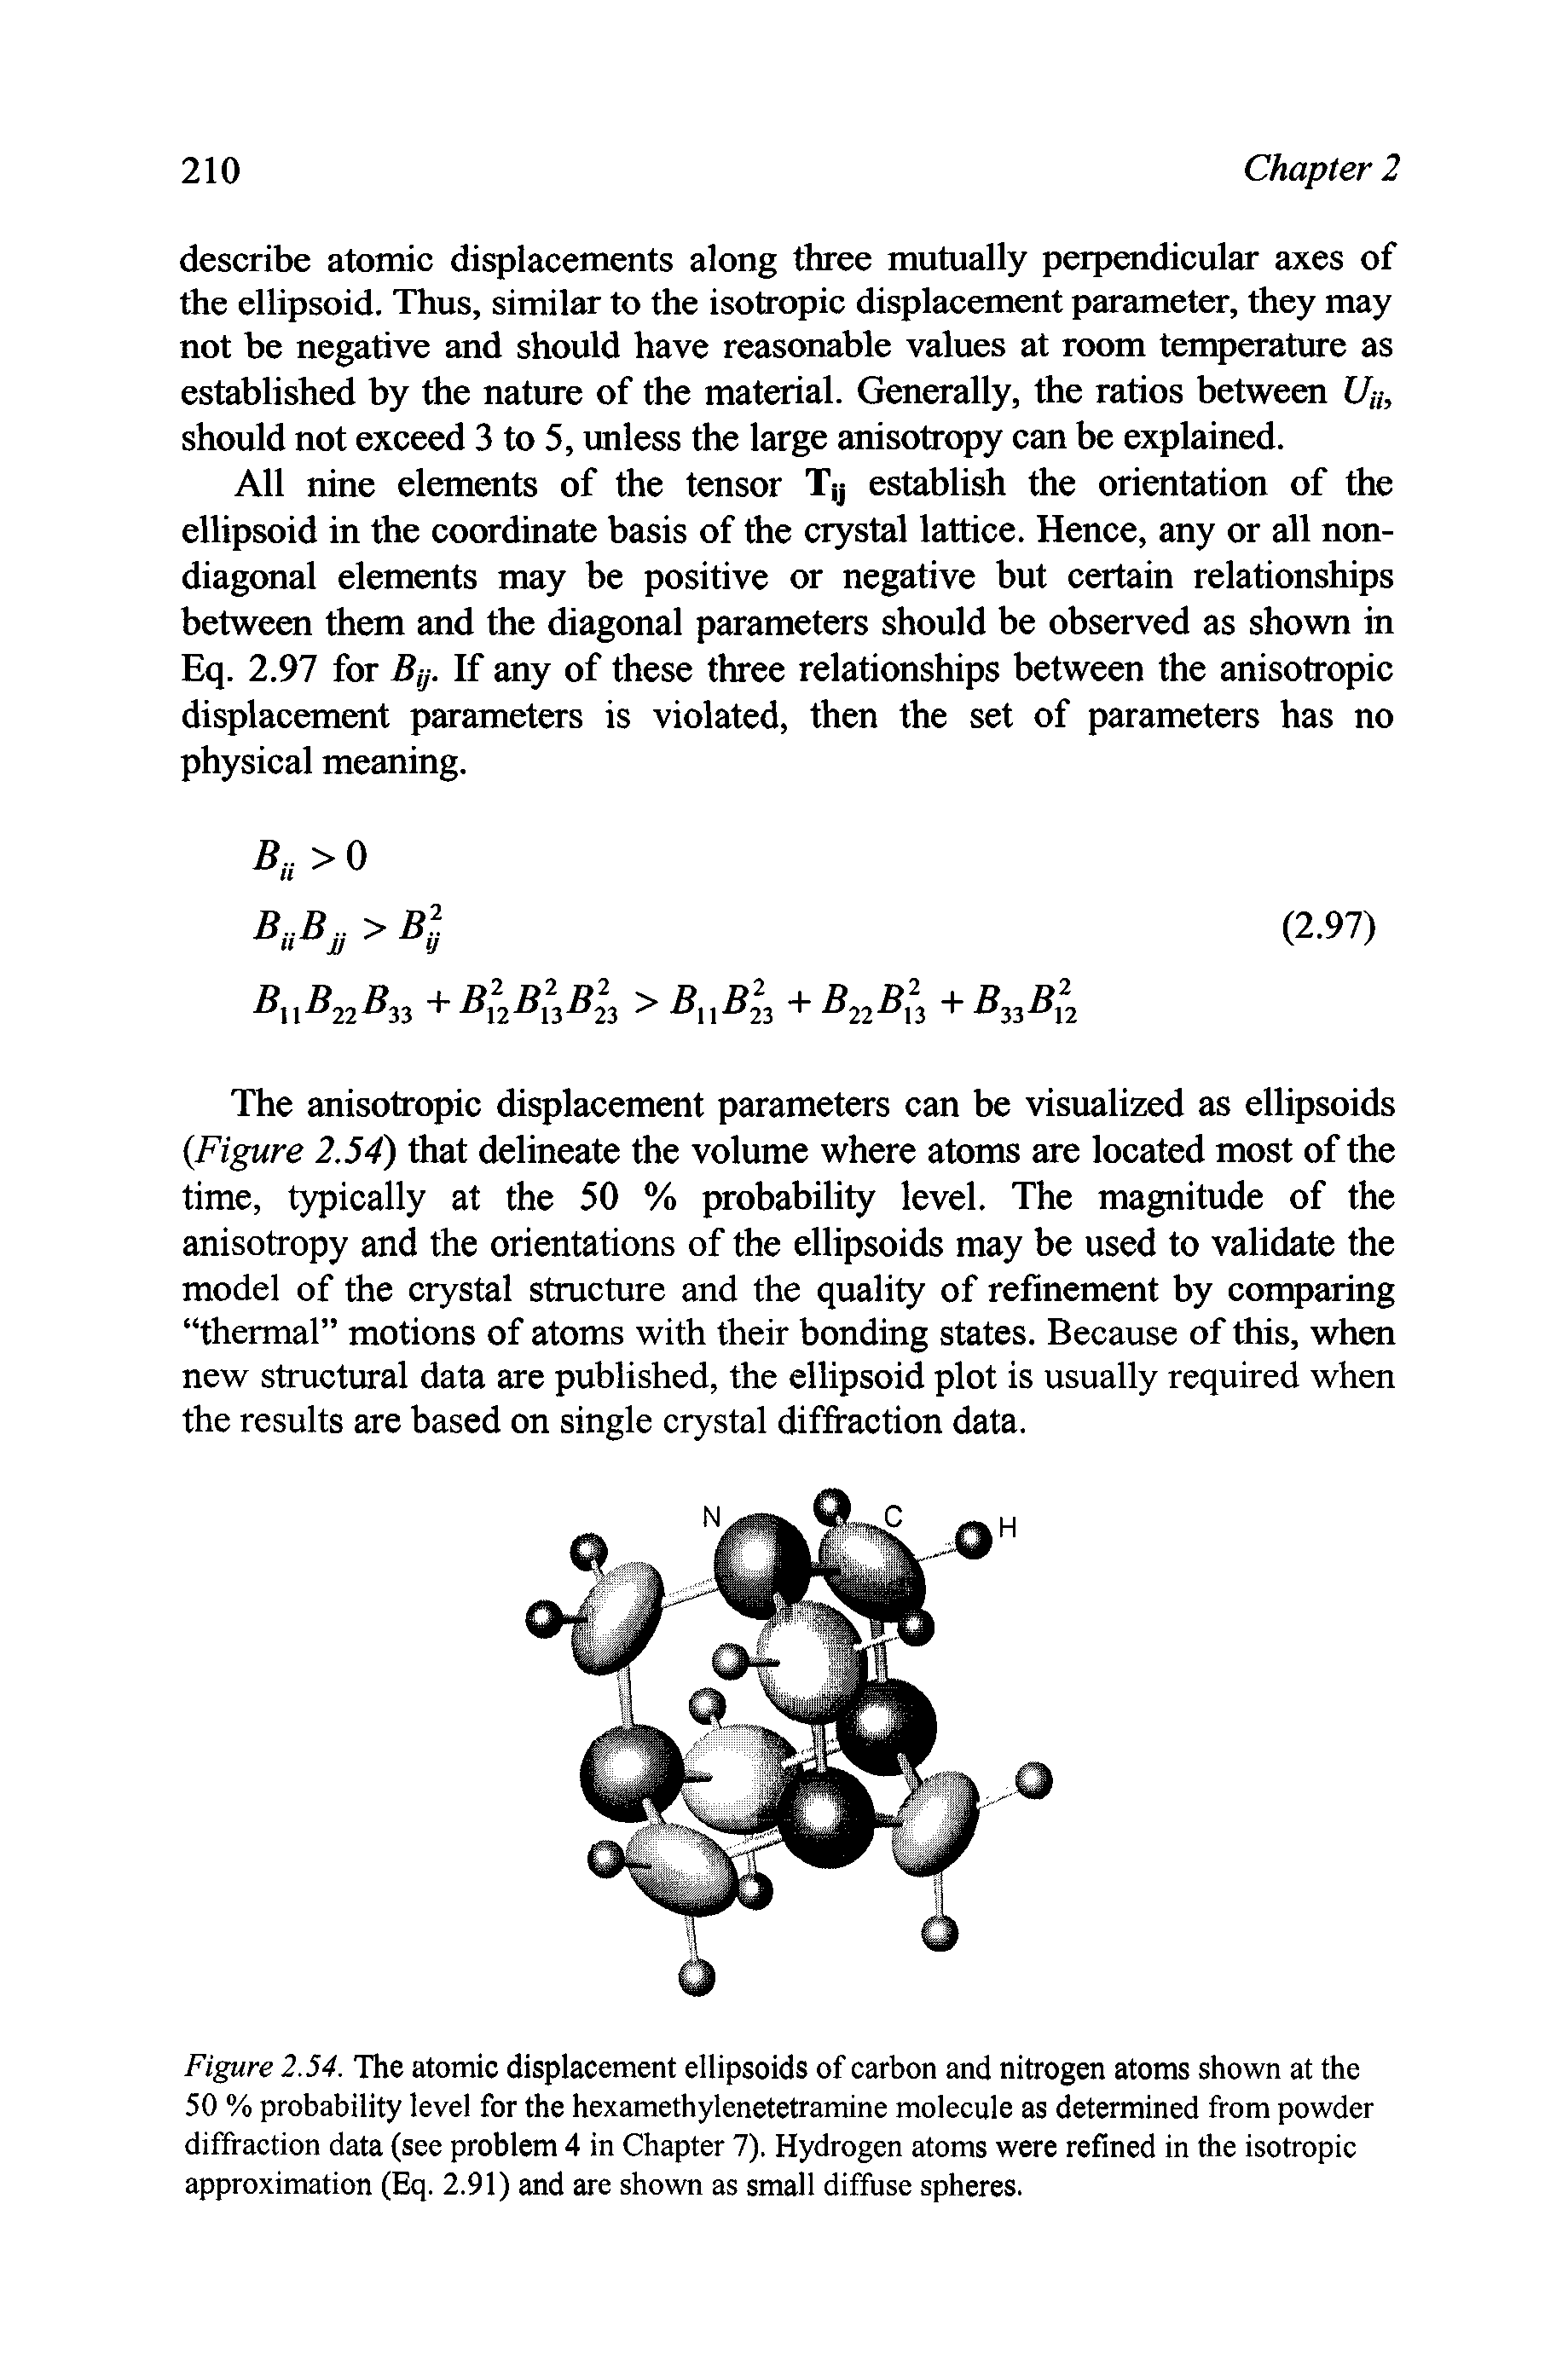 Figure 2.54. The atomic displacement ellipsoids of carbon and nitrogen atoms shown at the 50 % probability level for the hexamethylenetetramine molecule as determined from powder diffraction data (see problem 4 in Chapter 7). Hydrogen atoms were refined in the isotropic approximation (Eq. 2.91) and are shown as small diffuse spheres.